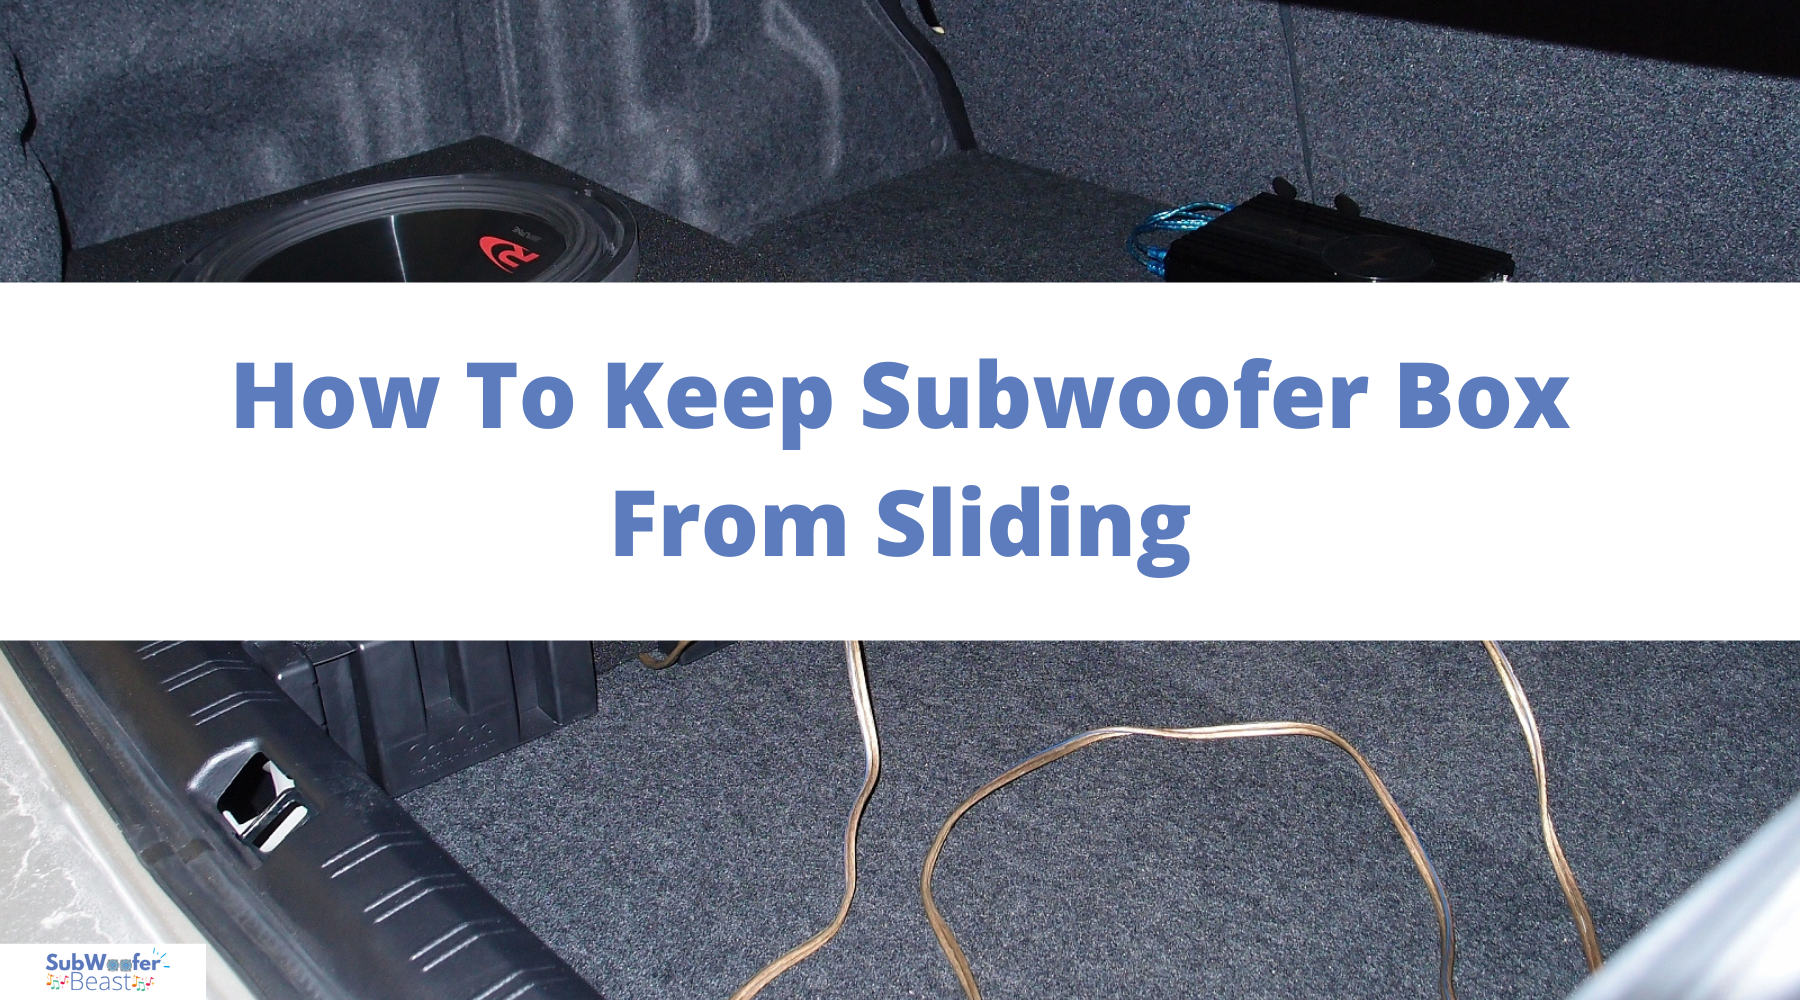 How To Keep Subwoofer Box From Sliding